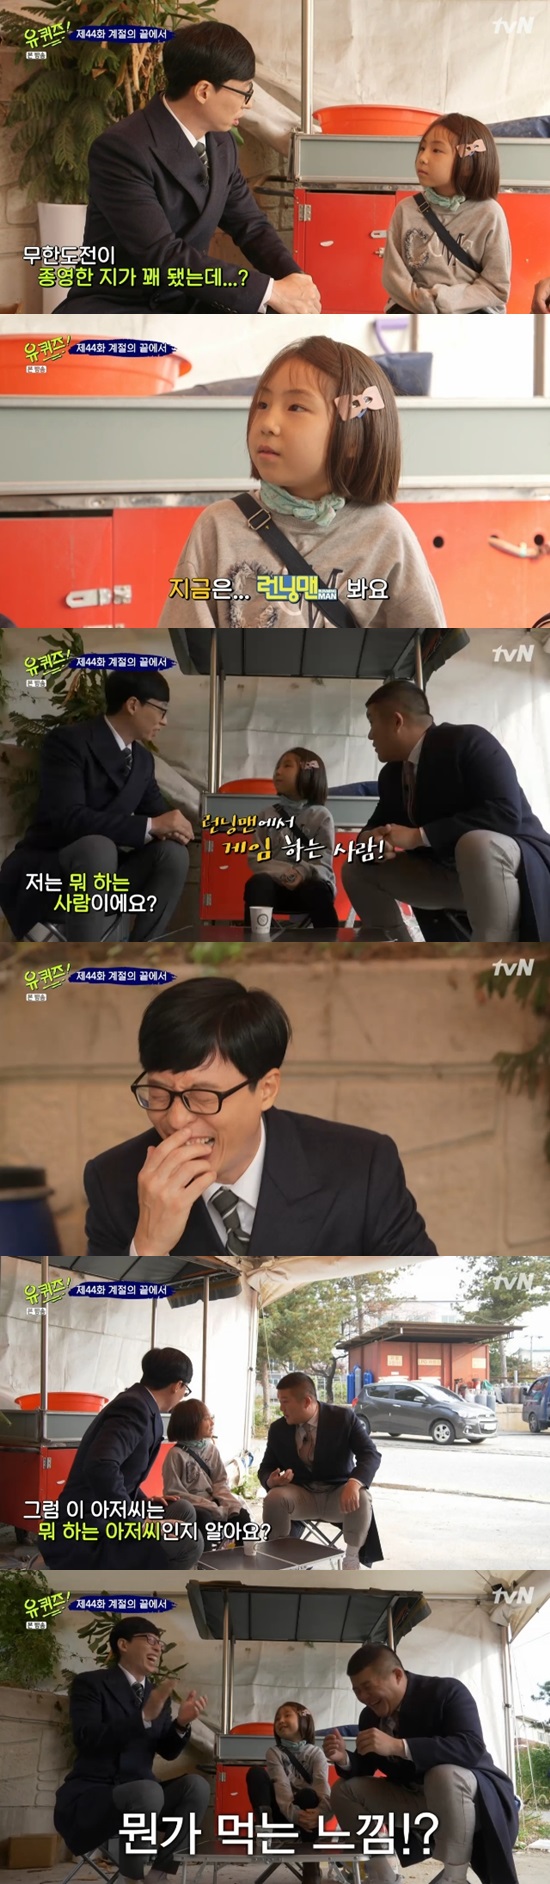 Yoo Jae-Suk and Jo Se-ho laughed concentrically.On TVN Yu Quiz on the Block 2 broadcast on November 19, Yoo Jae-Suk and Jo Se-ho talked with Joo Eun Yang.It was a dream for an environmental cleaner, but I decided to dream of a social worker and a pianist because I couldnt get up early in the morning, said Joo Eun-yang. I slept late to watch TV and it was hard to get up early in the morning.When Yoo Jae-Suk asked, What do you see?, Joo Eun-yang answered Infinite Challenge. When Yoo Jae-Suk asked, Is it quite over?, Joo Eun-yang replied, So now I see Running Man.When Jo Se-ho asked, So you know who this Man from Nowhere (Yoo Jae-Suk) is? Ju Eun-yang replied, I am a Game in Running Man and laughed.Yoo Gyeong-sang